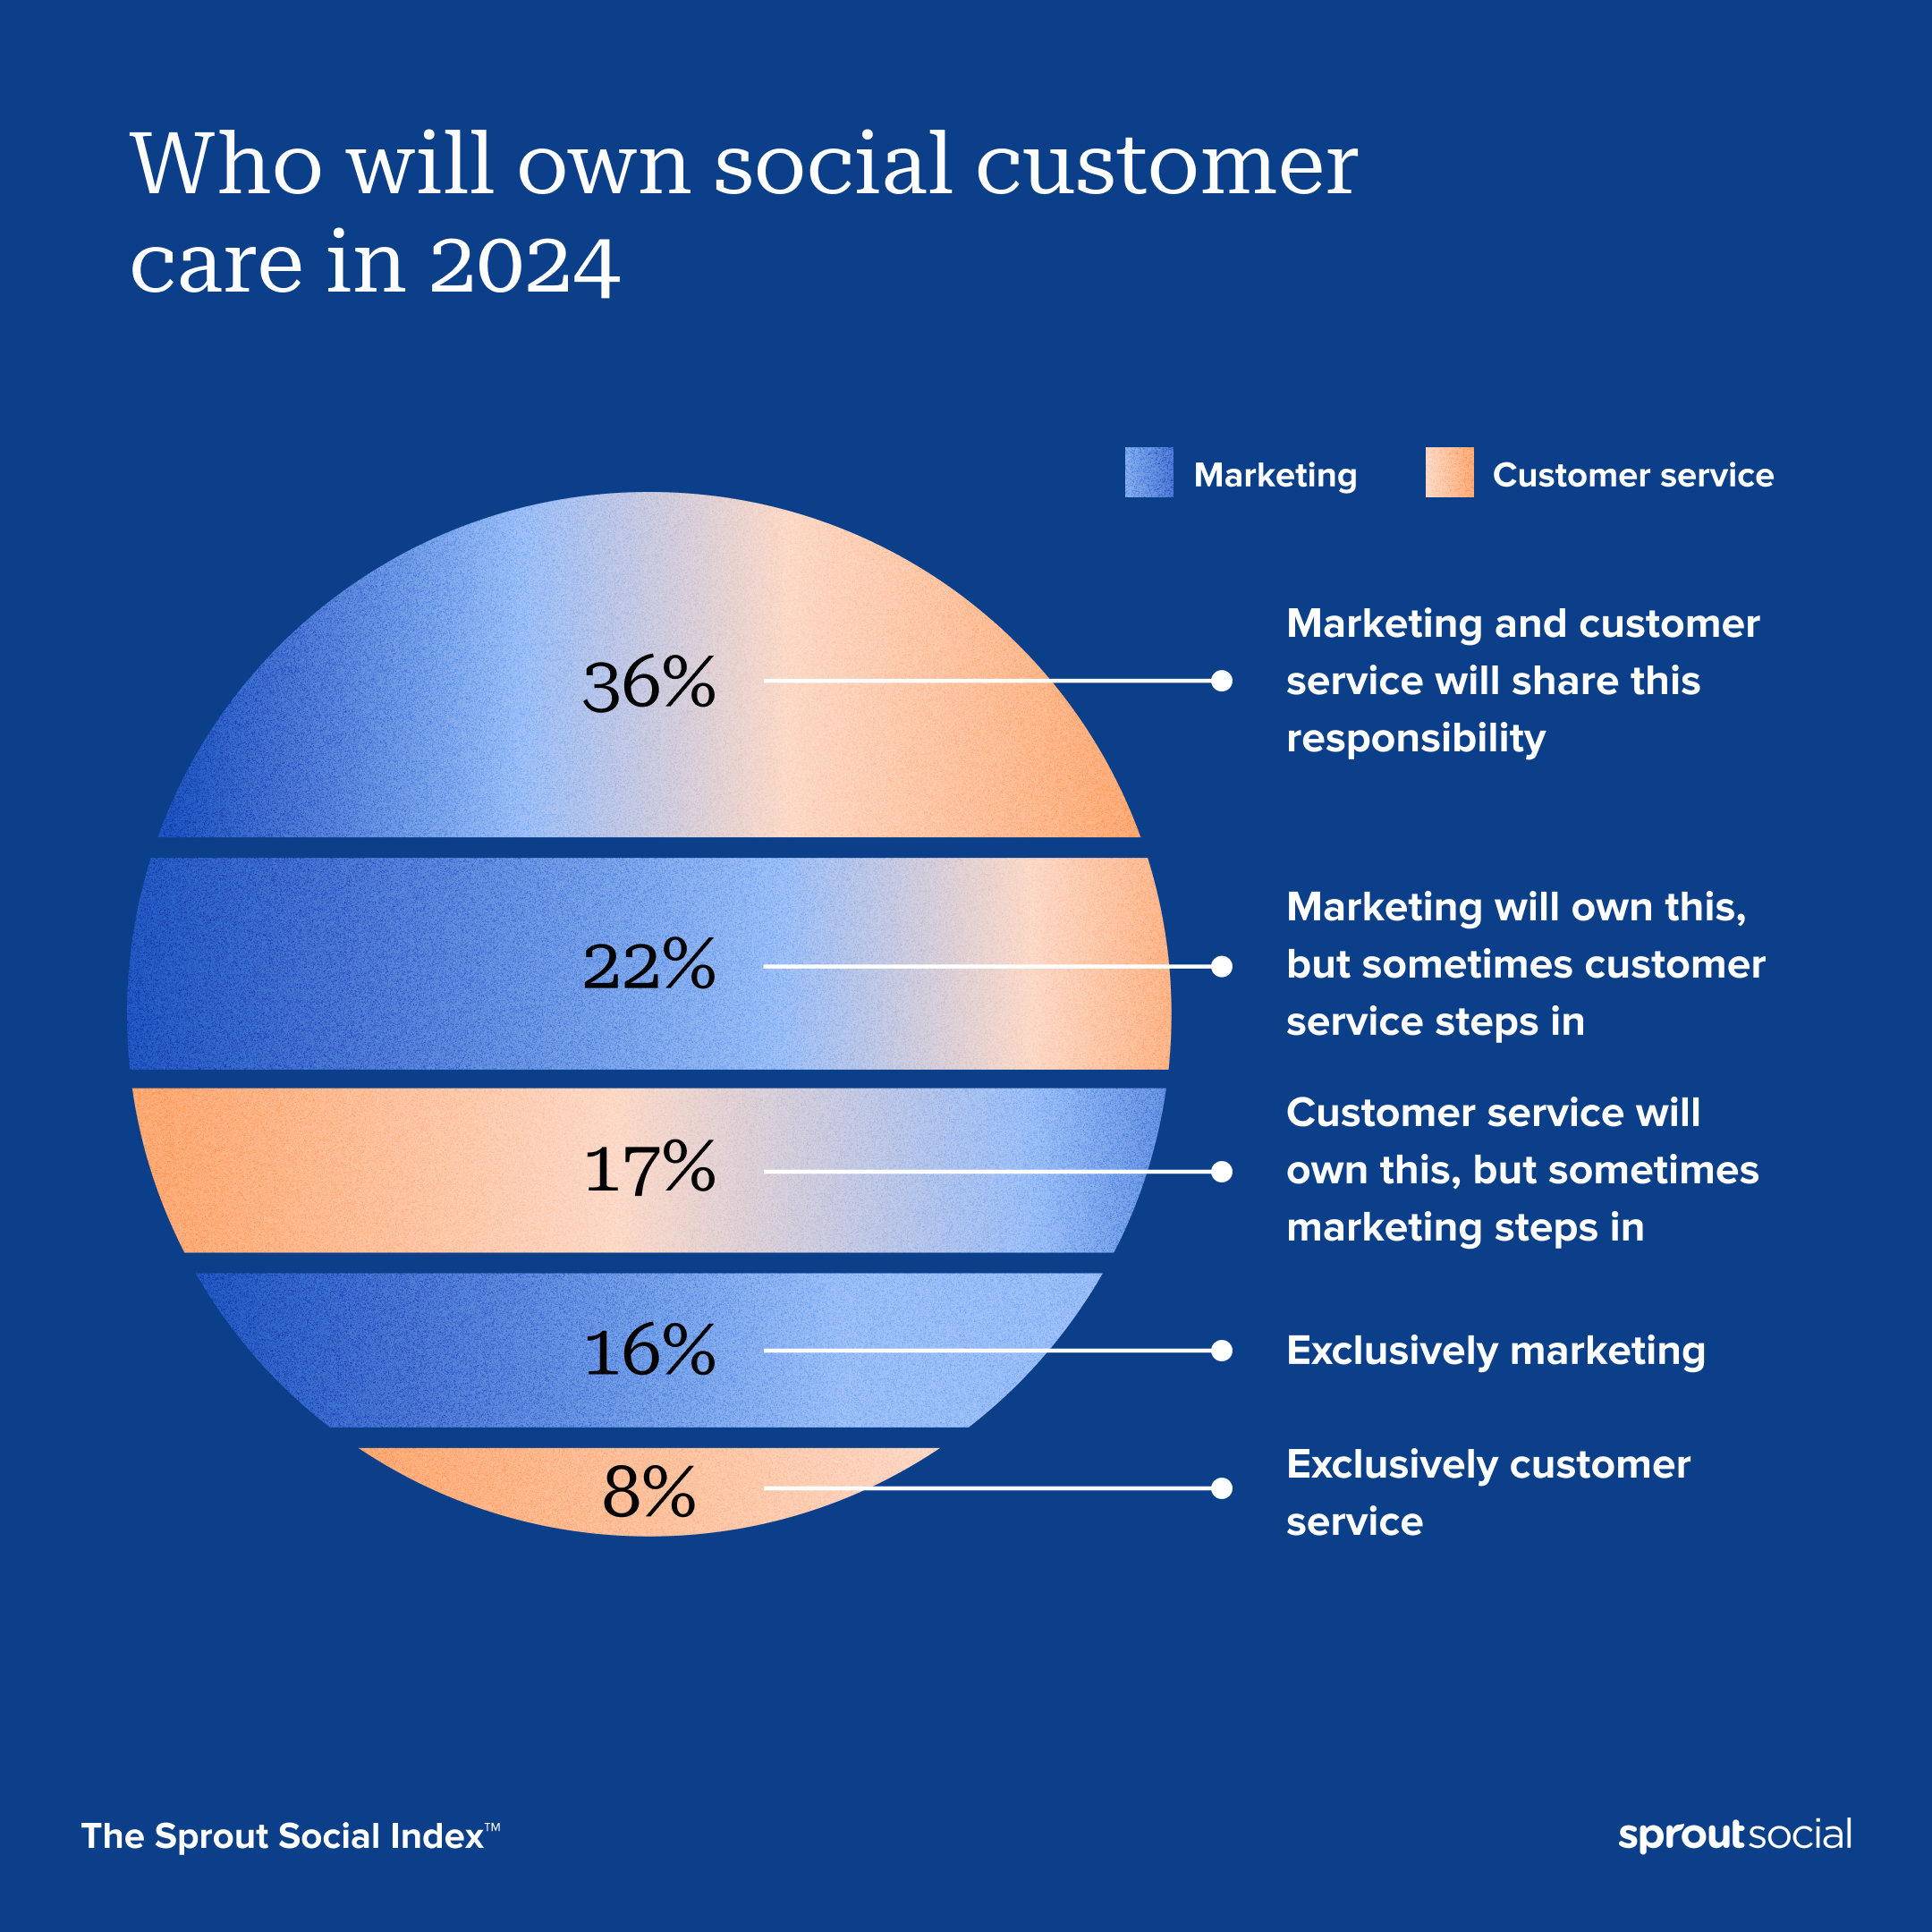 Data visualization from the 2023 Sprout Social Index breaking down which teams own the social customer care function. Only 24% of businesses anticipate a single team will take sole ownership of social customer care in 2024. 